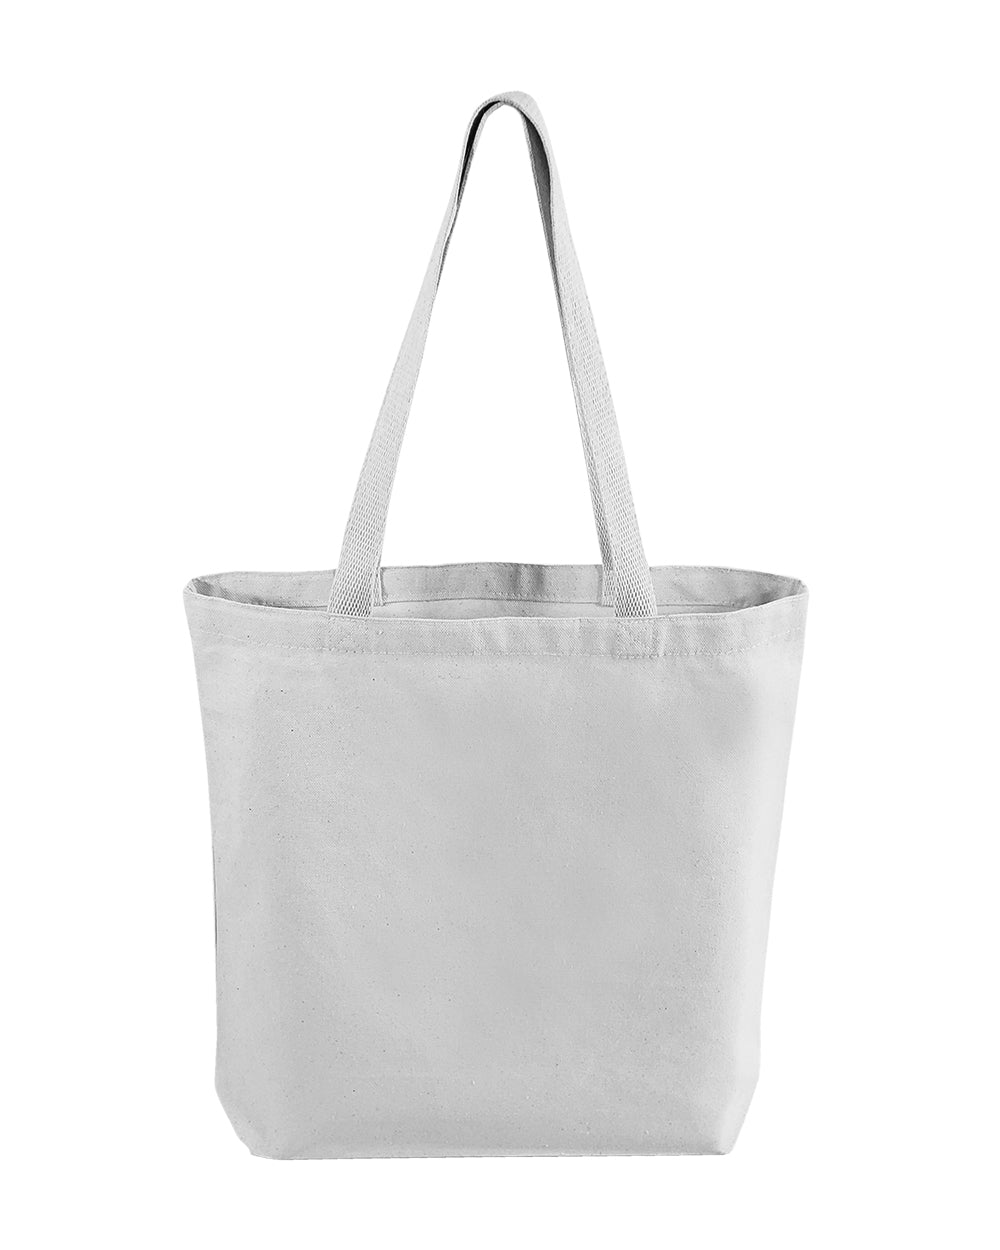 144 ct High Quality Promotional Canvas Tote Bags w/Gusset - By Case